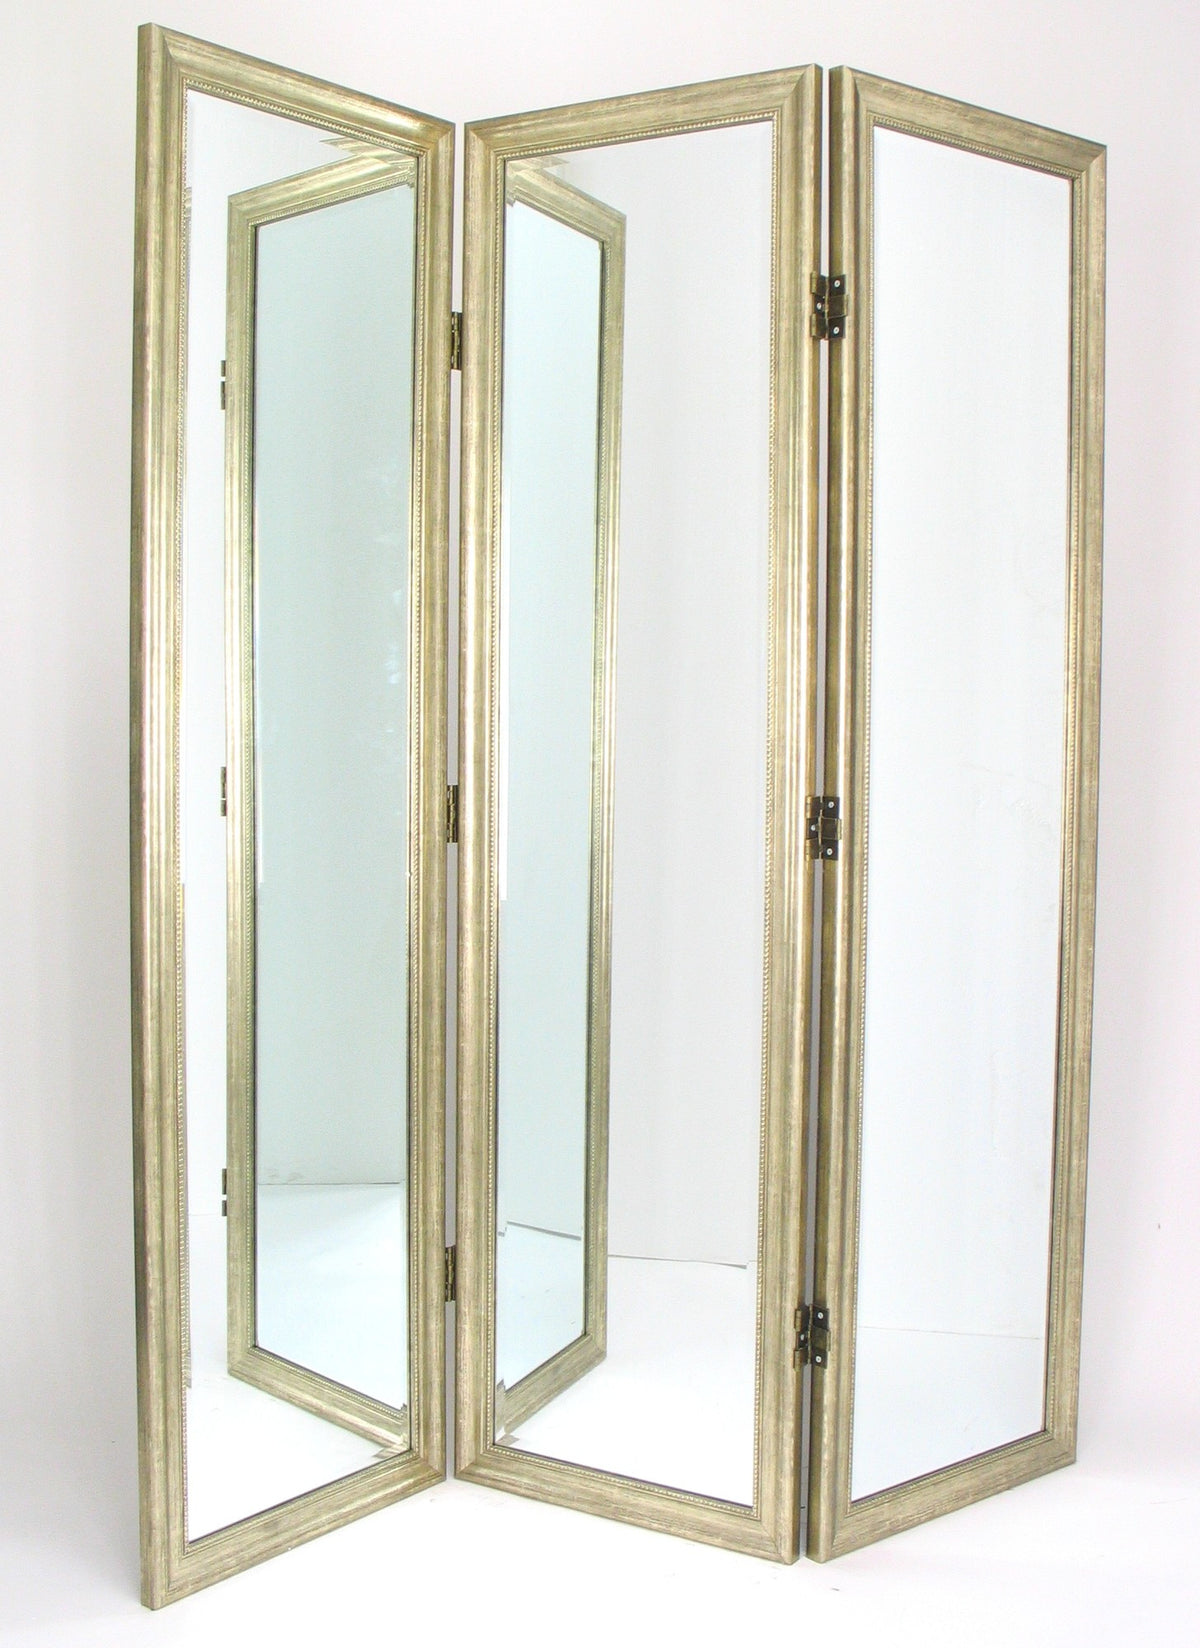 Angie Mirrored Room Divider